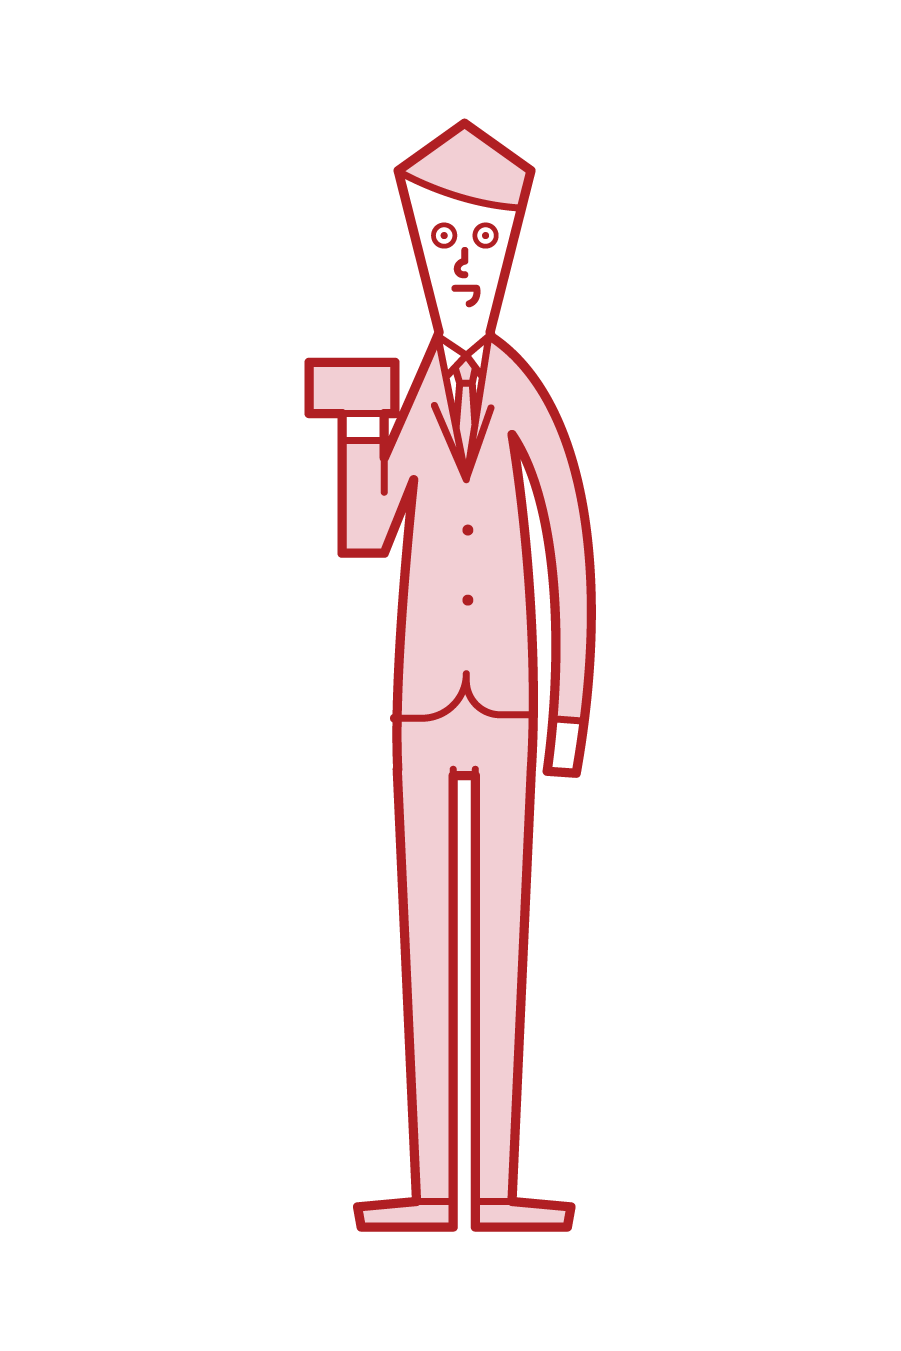 Illustration of a man with a credit card in his hand